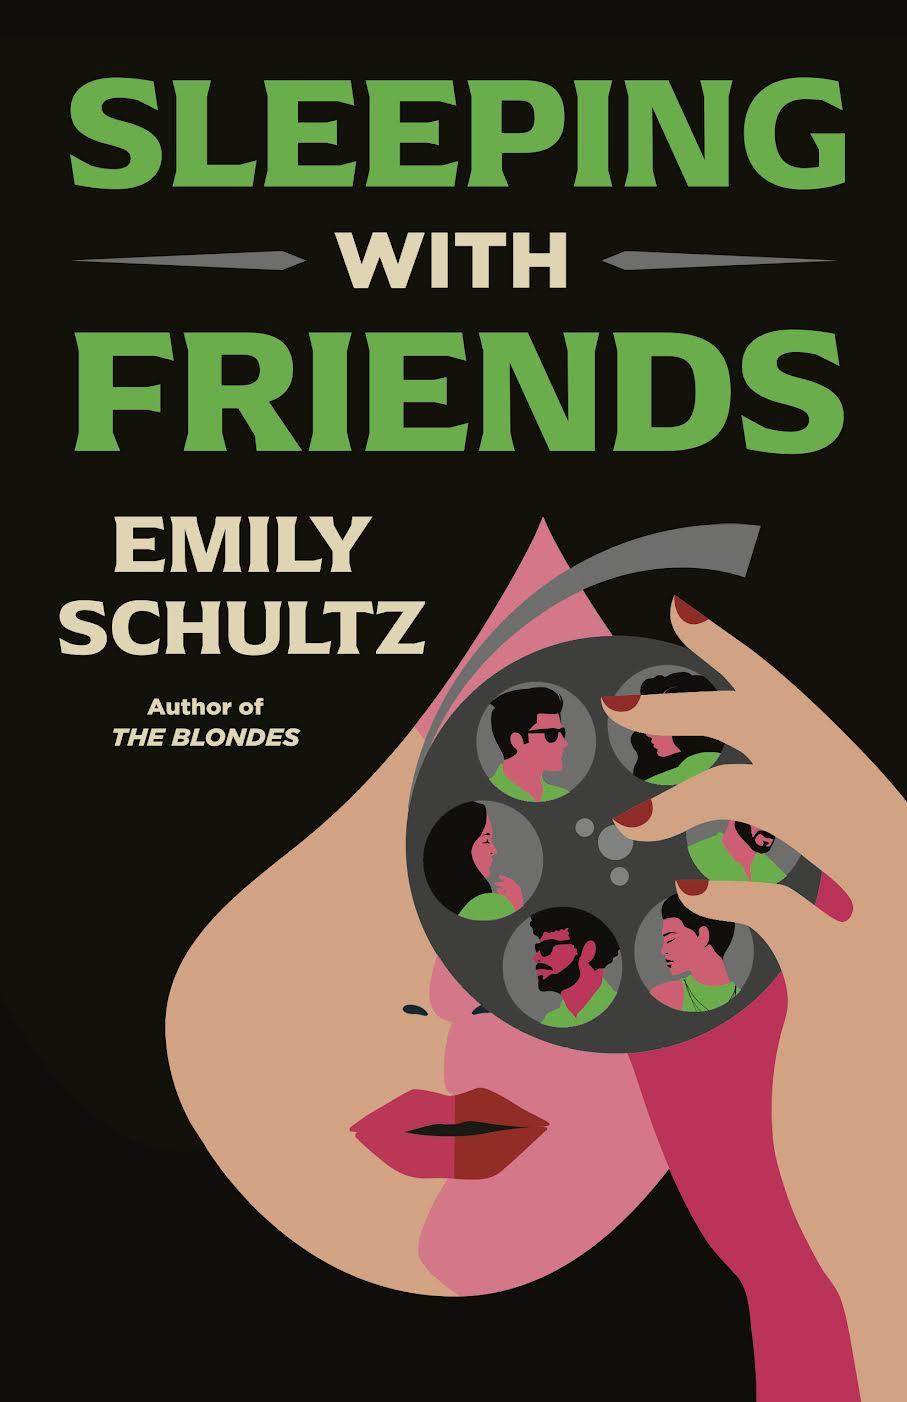 Book Launch: Sleeping With Friends by Emily Schultz in conversation with Rob Hart